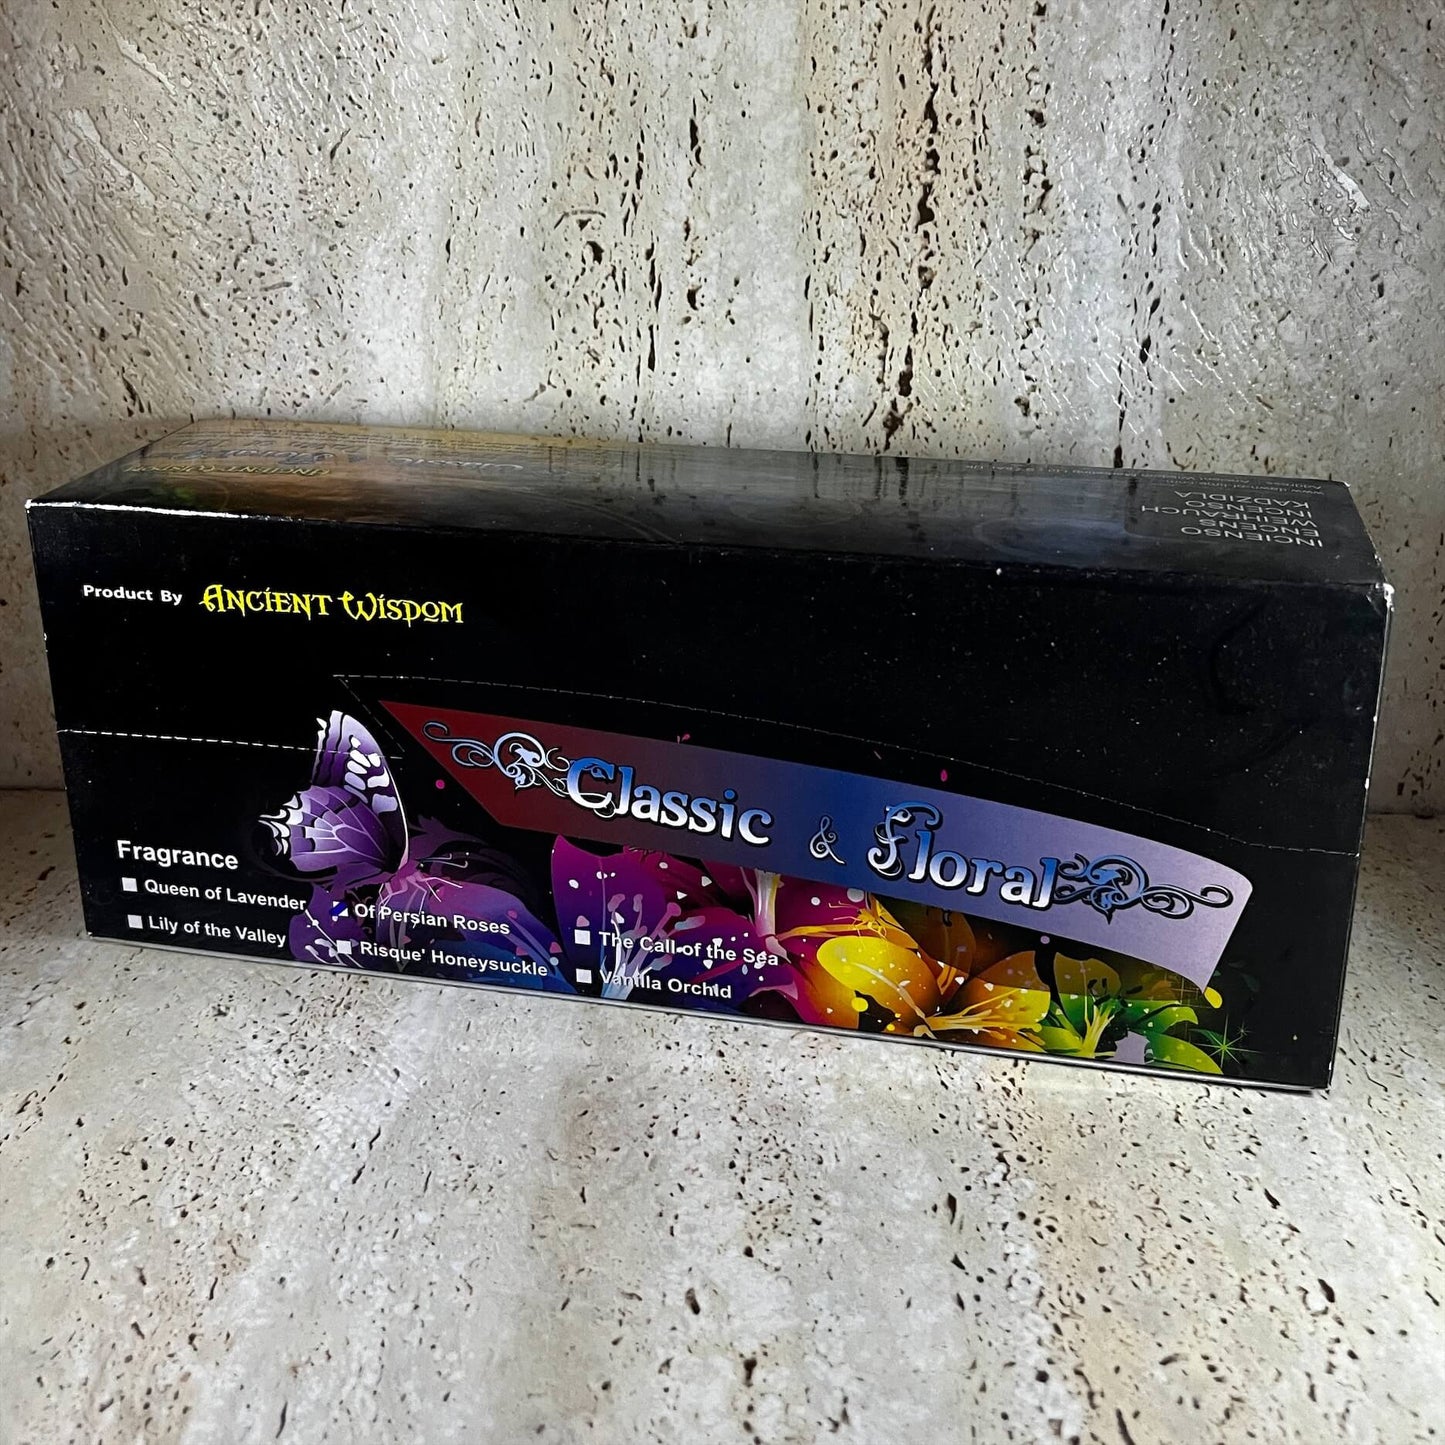 Dawn of Time Vanilla Orchid incense